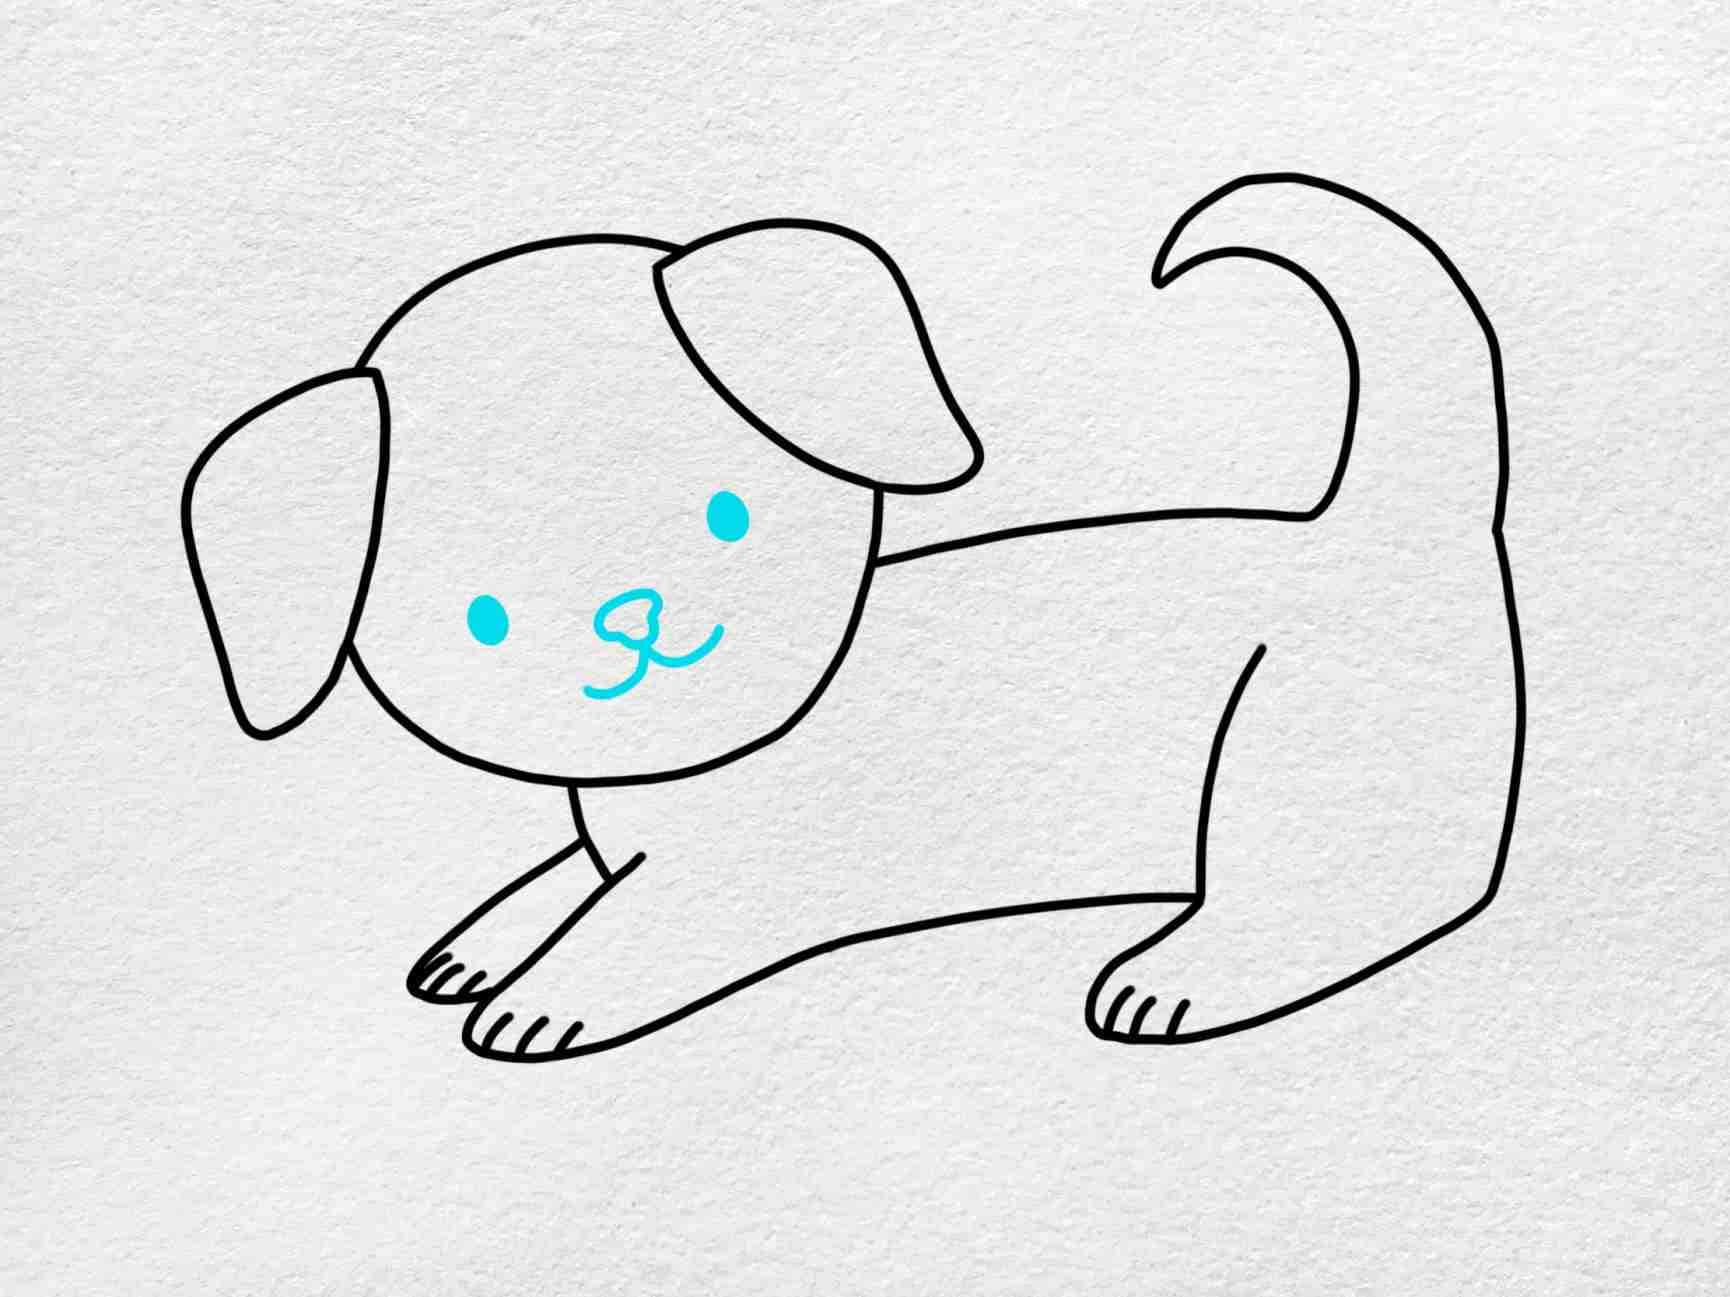 Step by Step Drawing Instructions for Dogs | Free Printable Puzzle Games